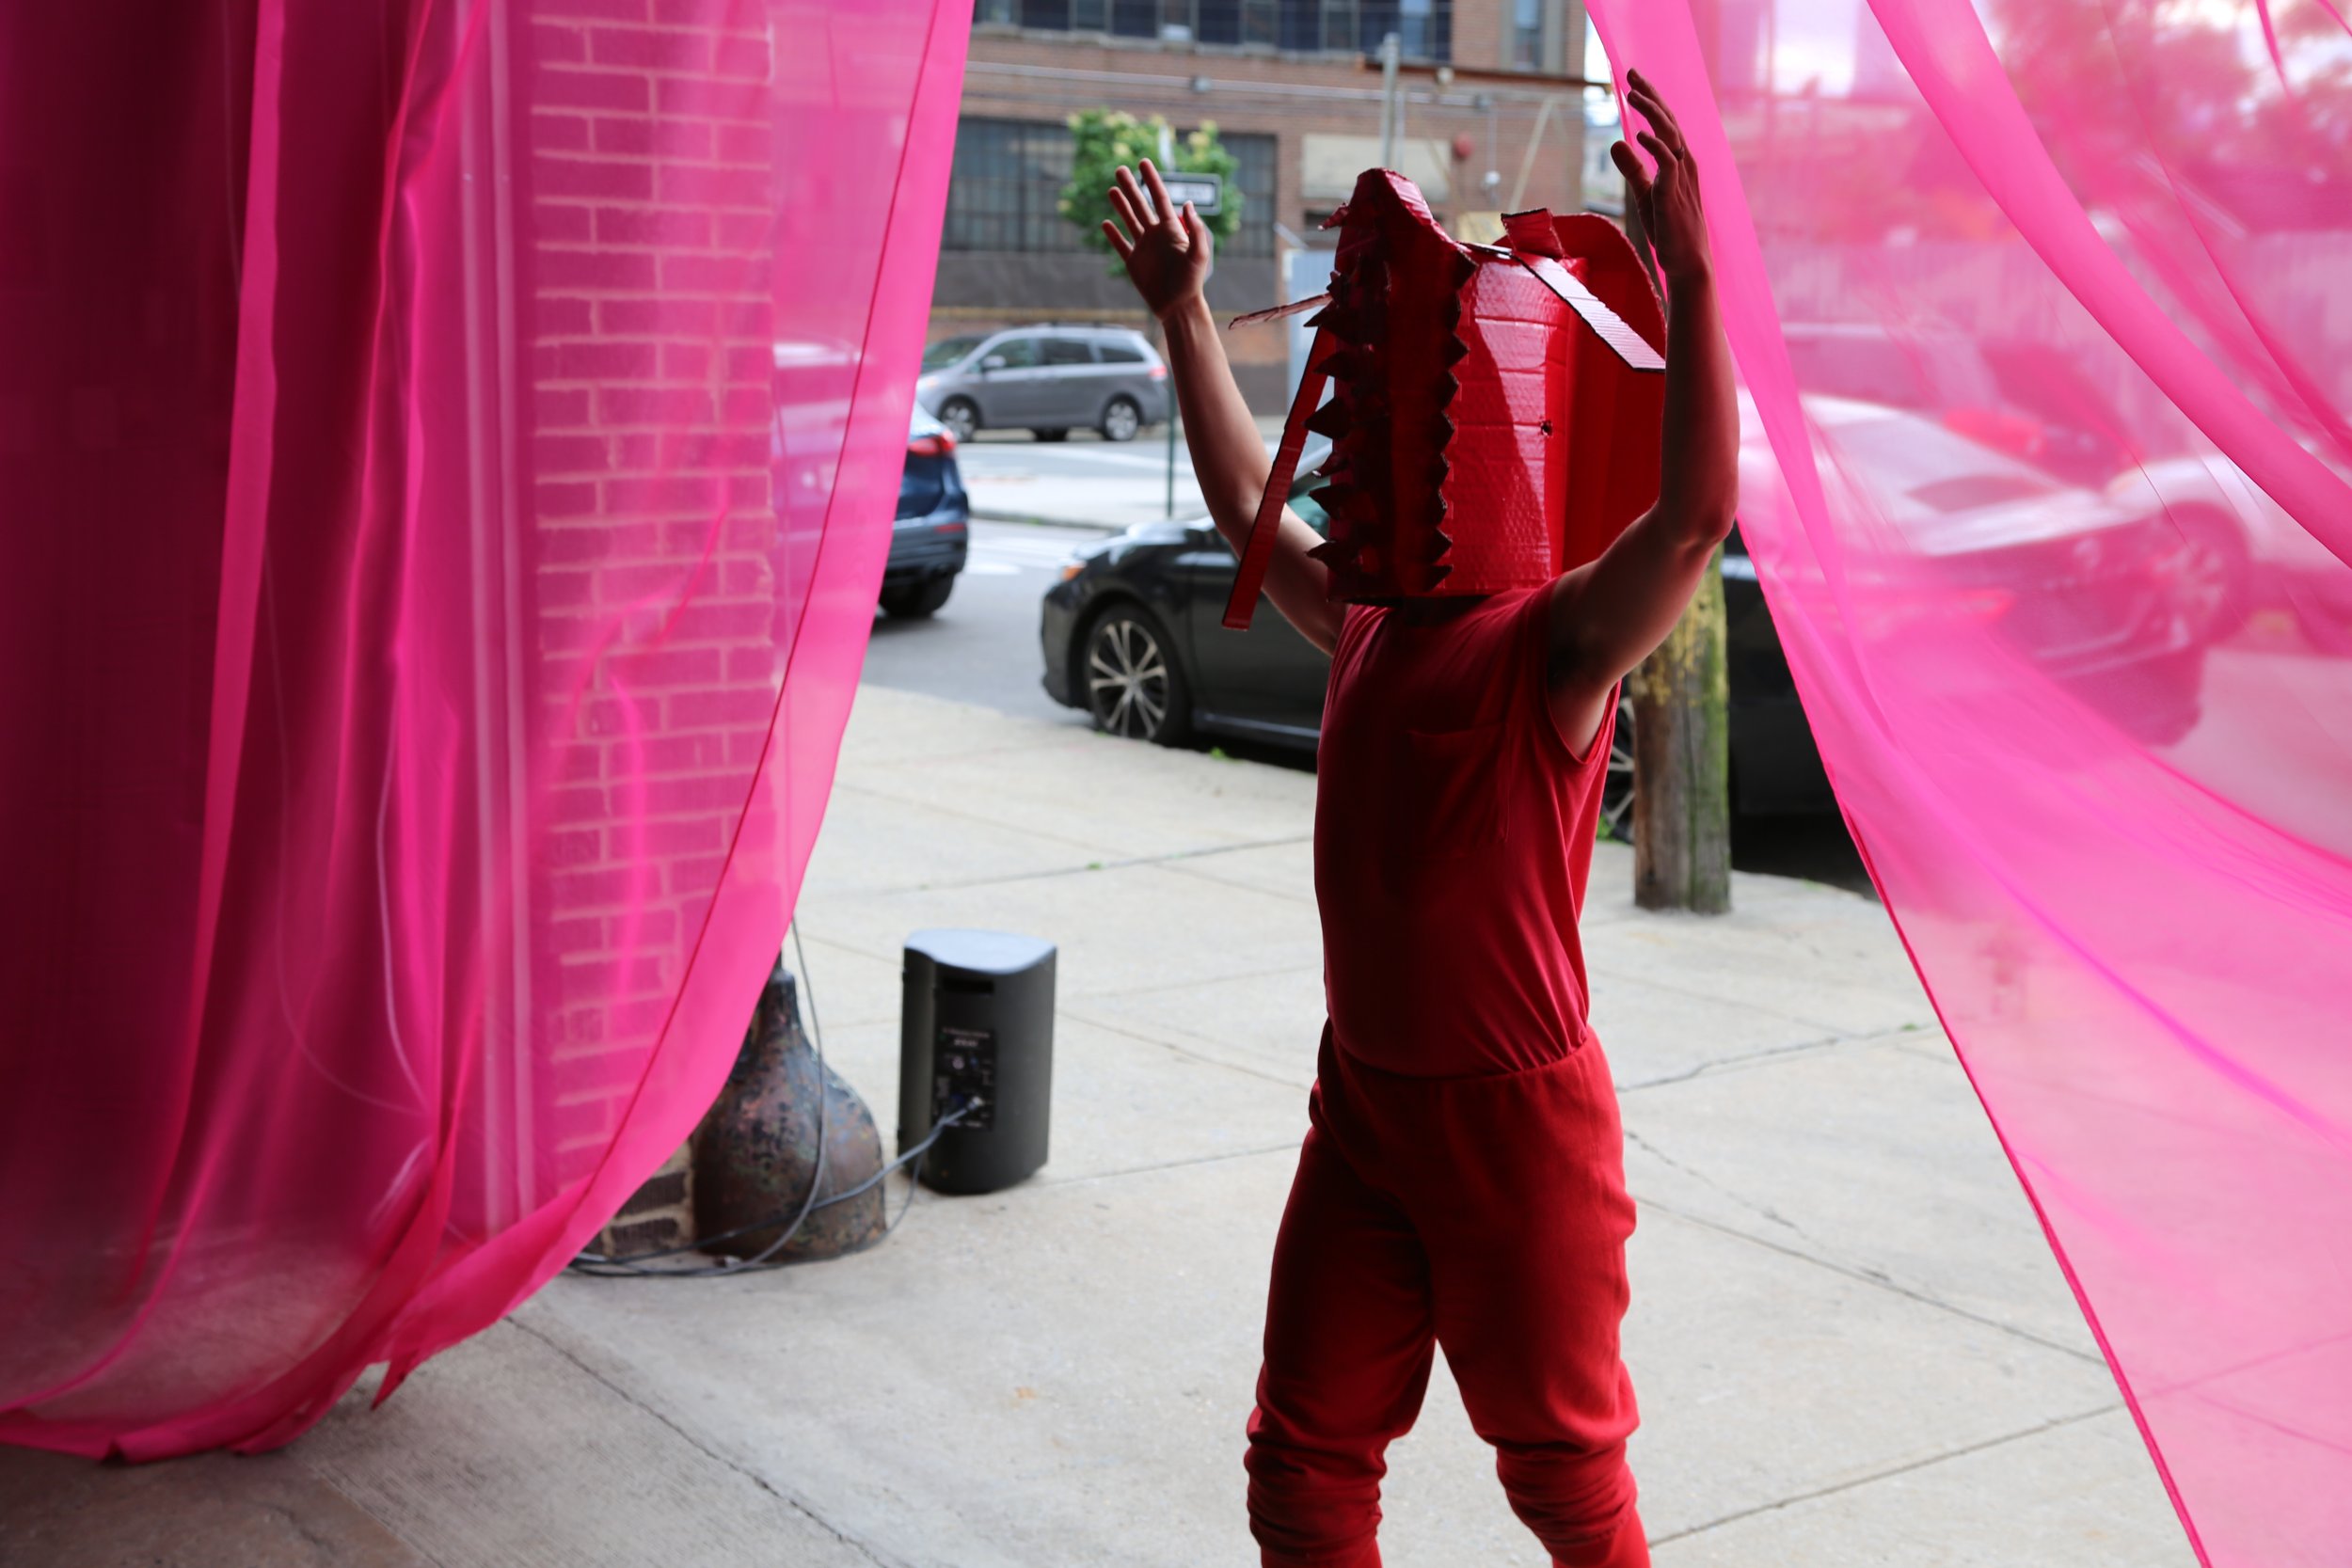 A performer dressed in red and wearing a large, red mask with sharp points covering the front with long tentacles at top, raises their arms and moves through a pink curtain. Photo by Brian Rogers.